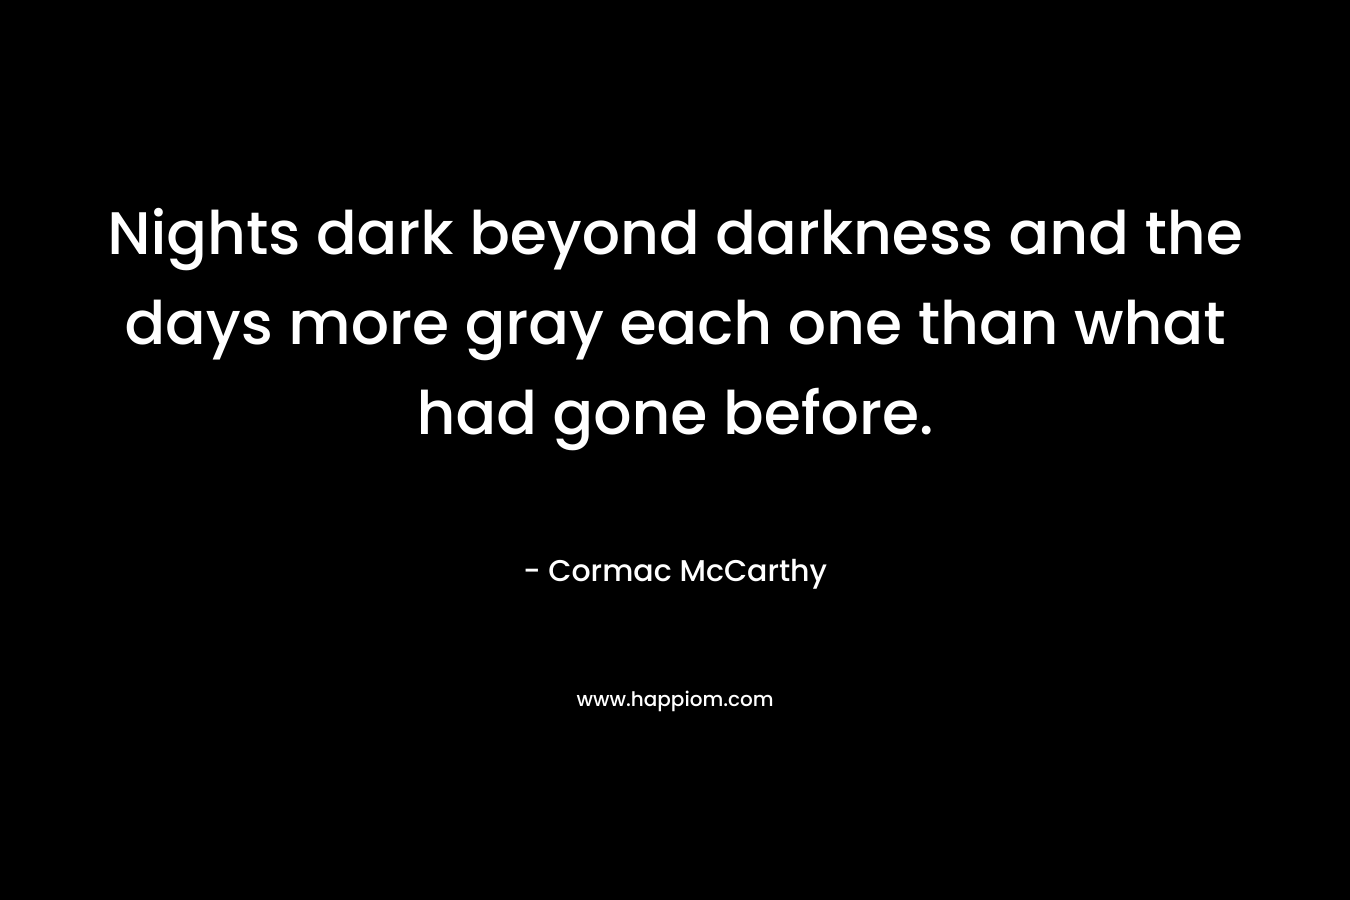 Nights dark beyond darkness and the days more gray each one than what had gone before.